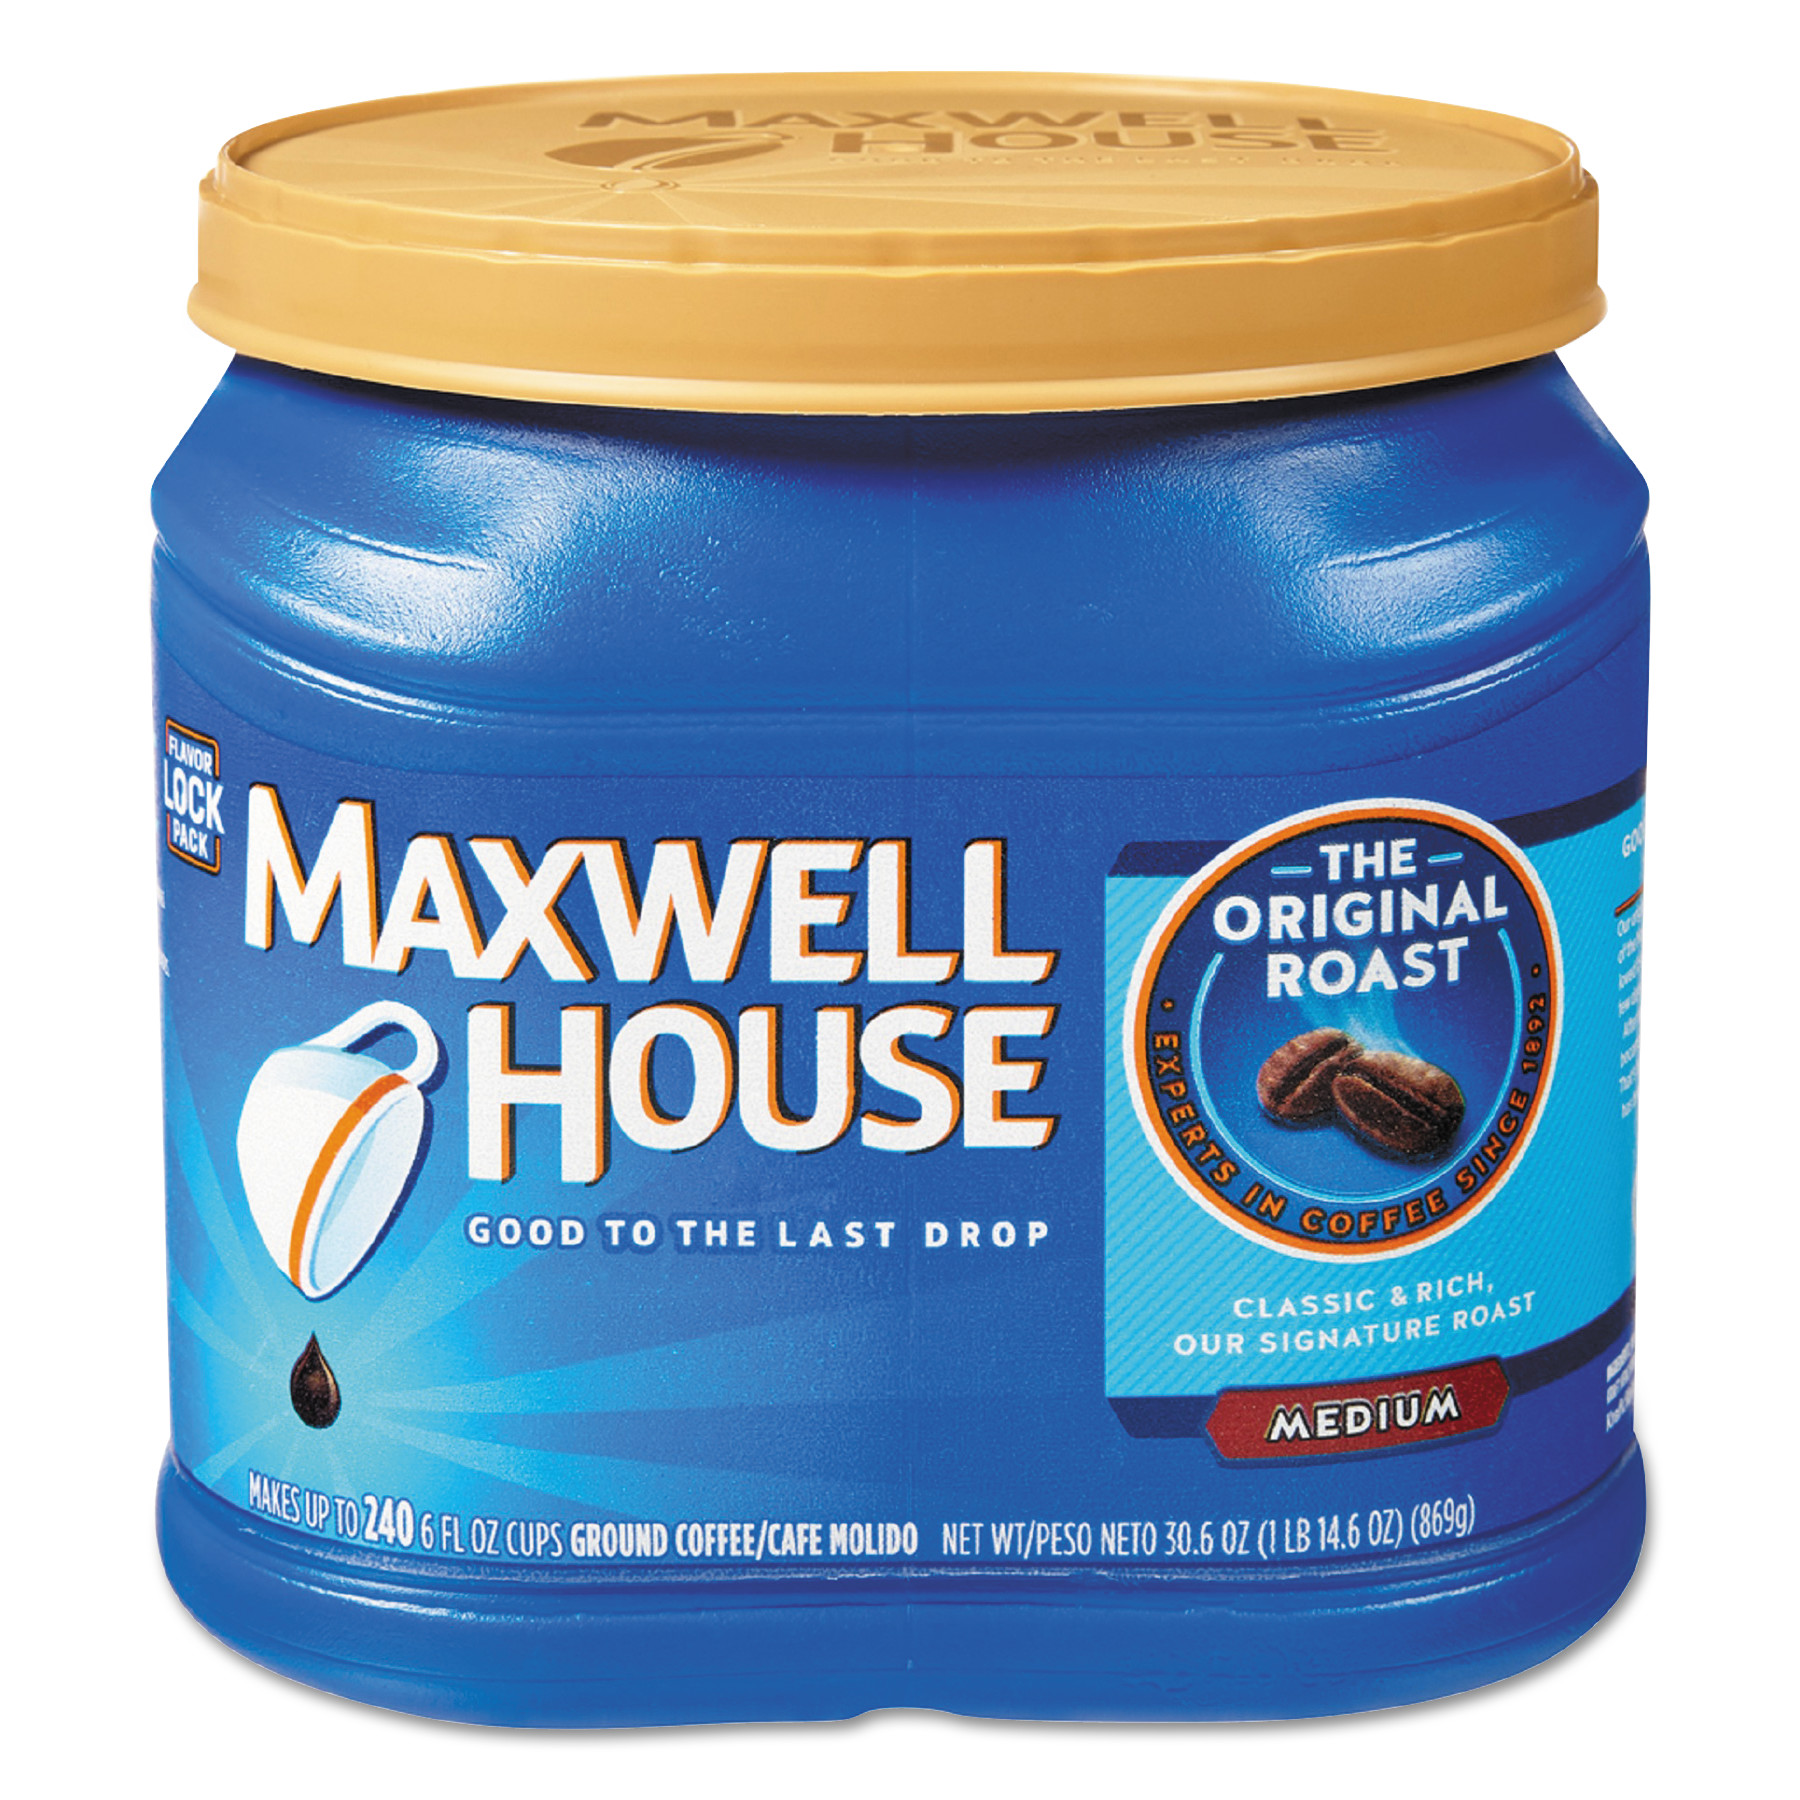  Maxwell House GEN04648CT Coffee, Ground, Original Roast, 30.6 oz Canister, 6 Canisters/Carton (MWH04648CT) 